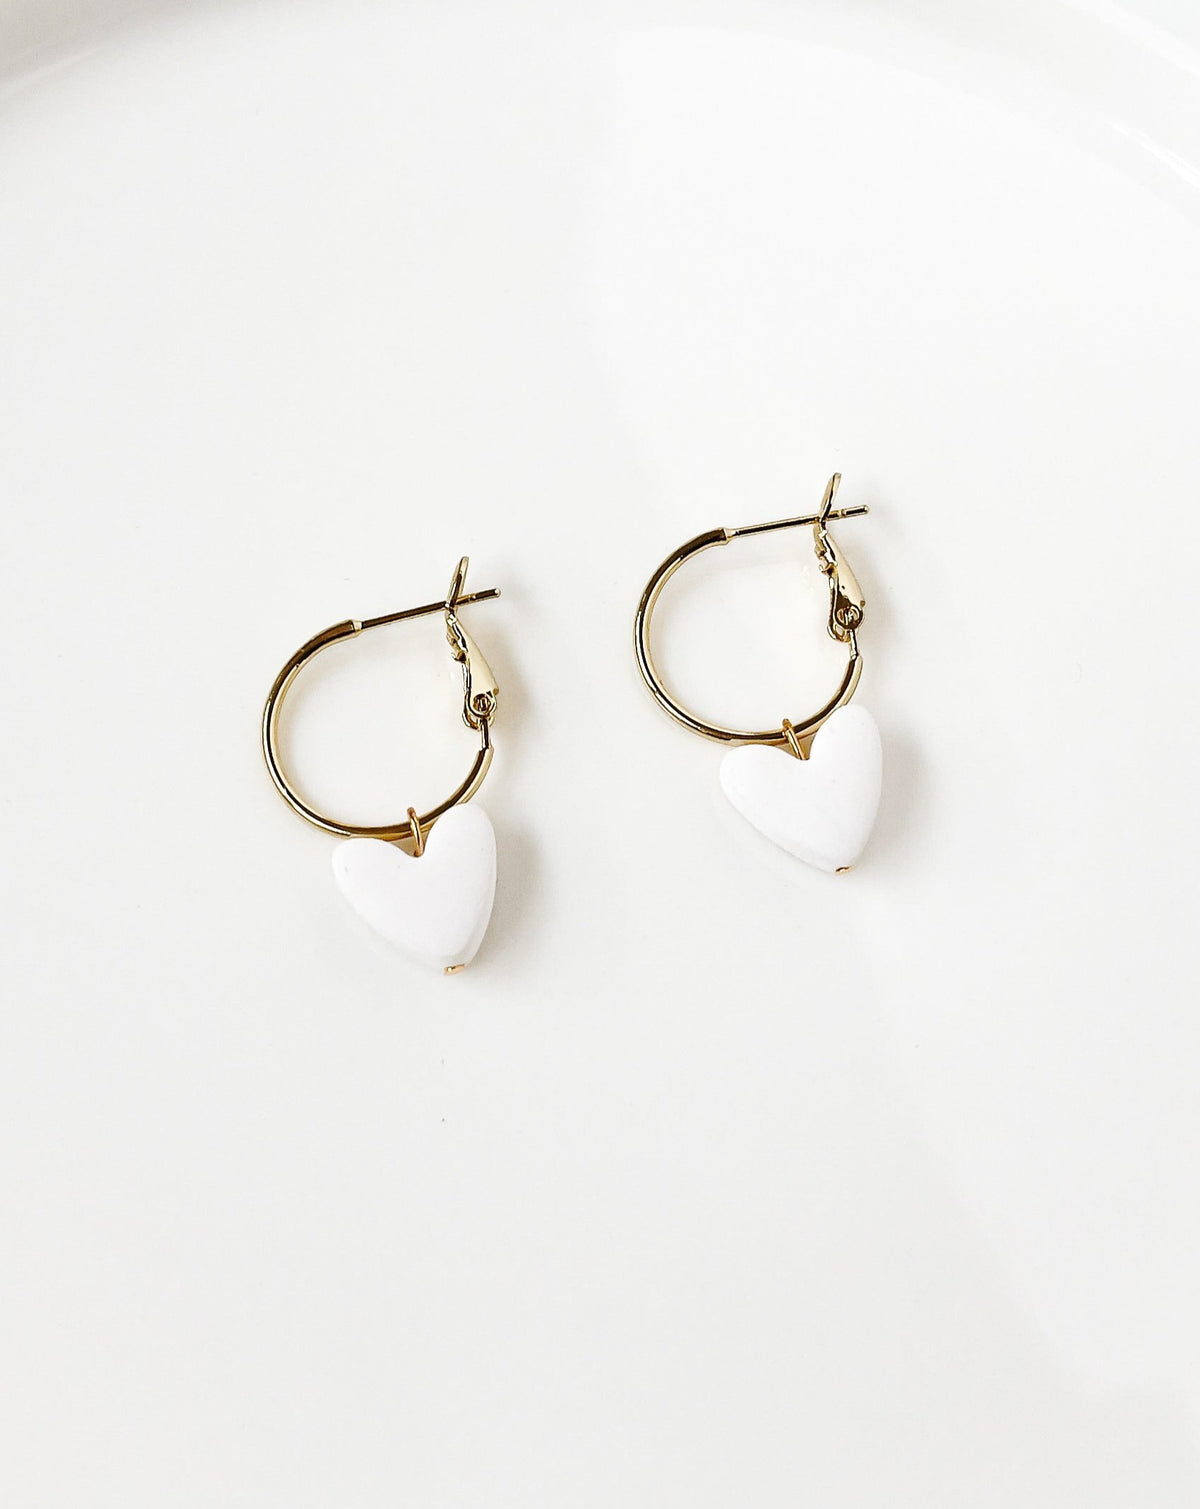 Close up of Charming Heart earrings with Gold Regular Hoops and white Heart charm.